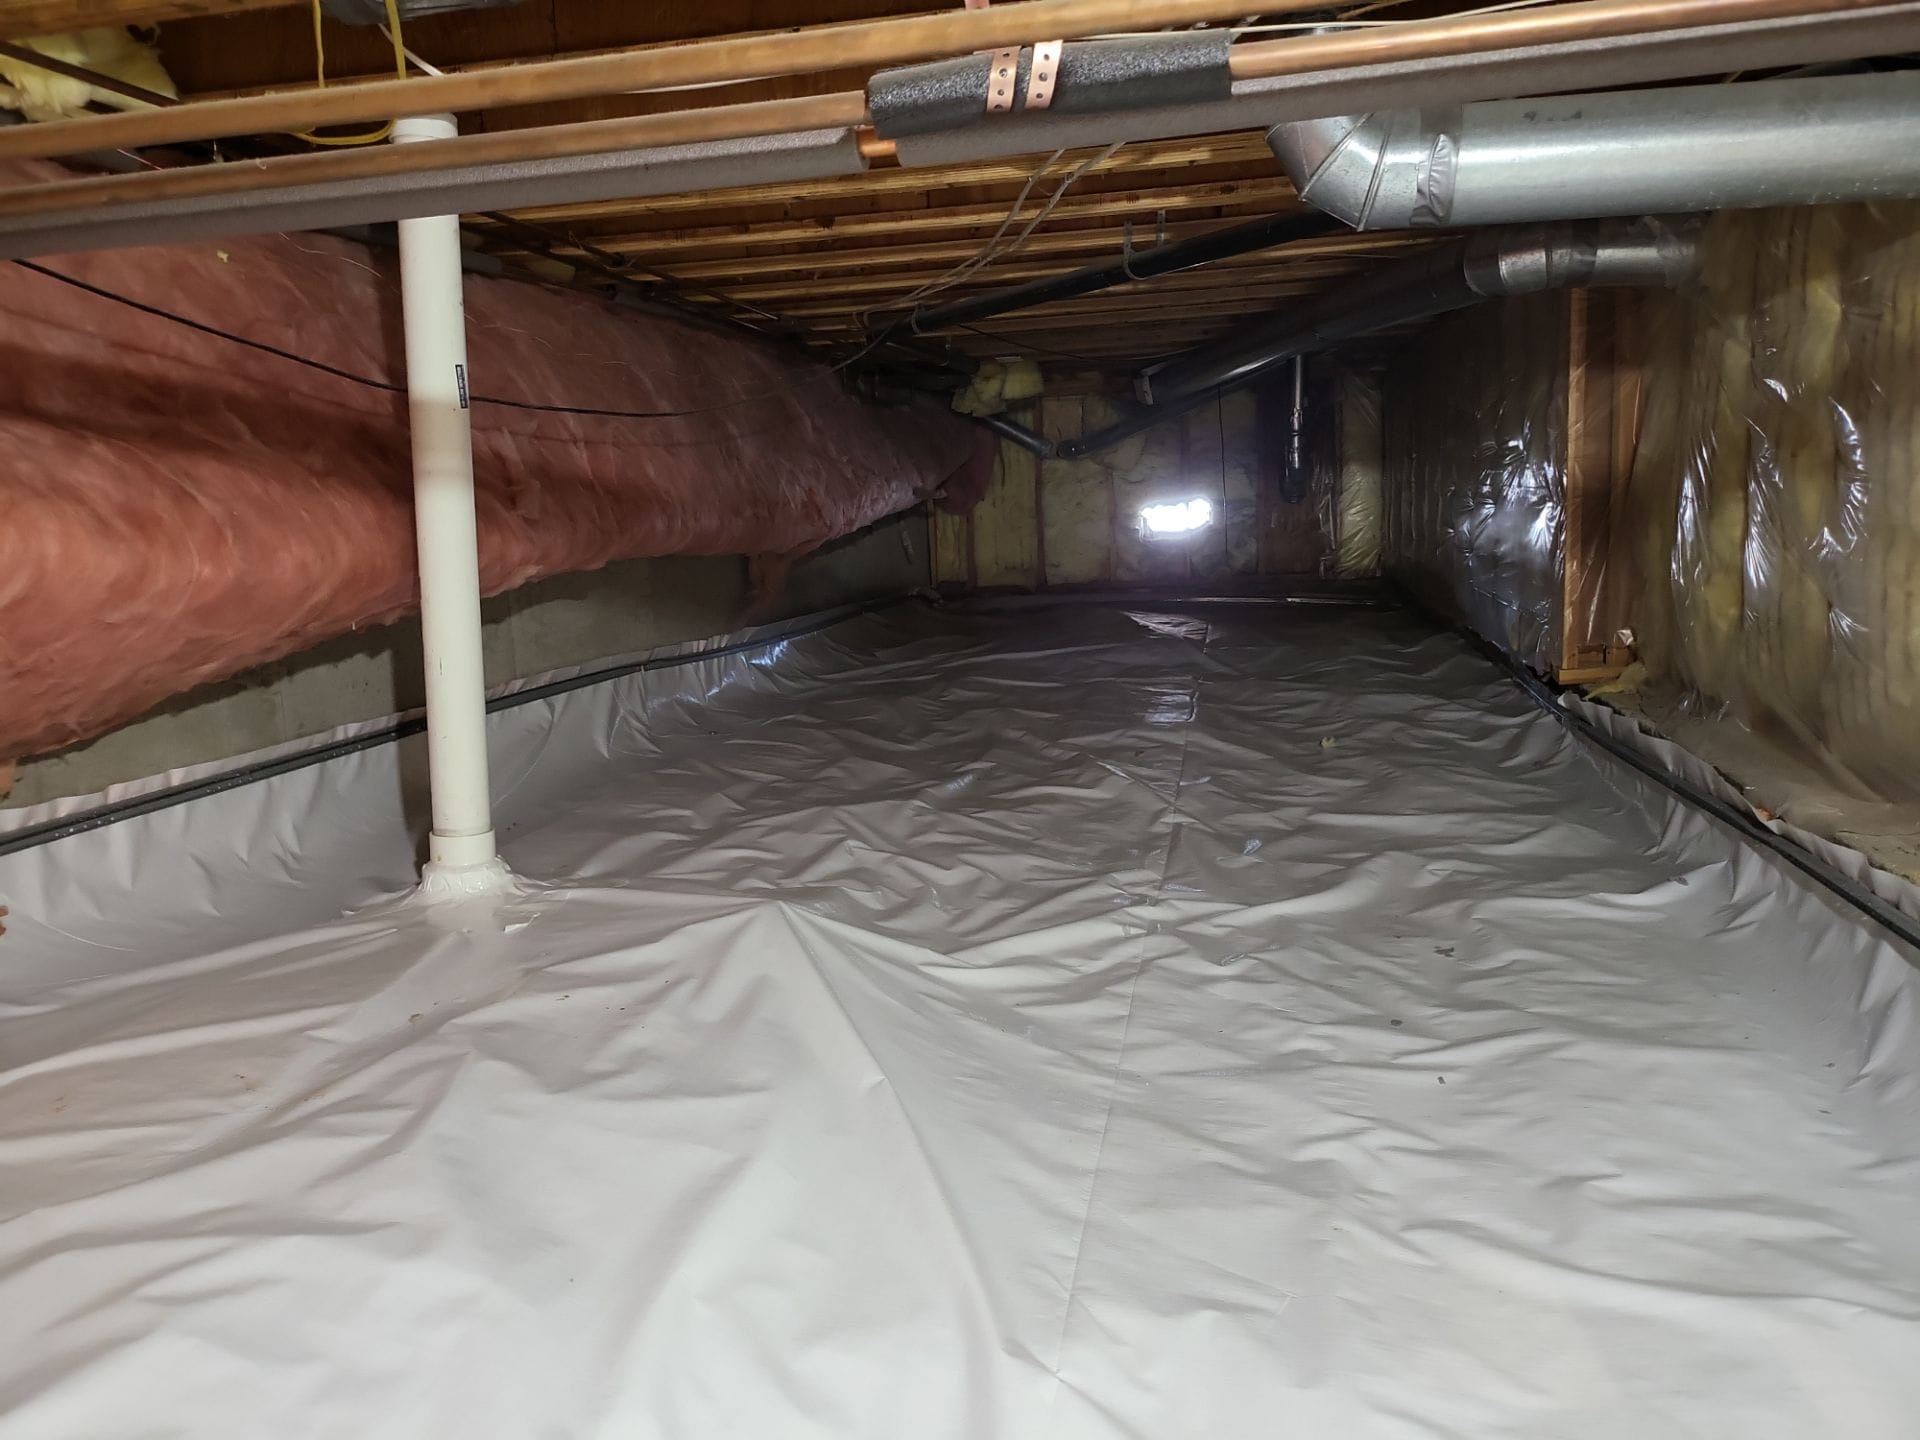 This image shows a crawlspace